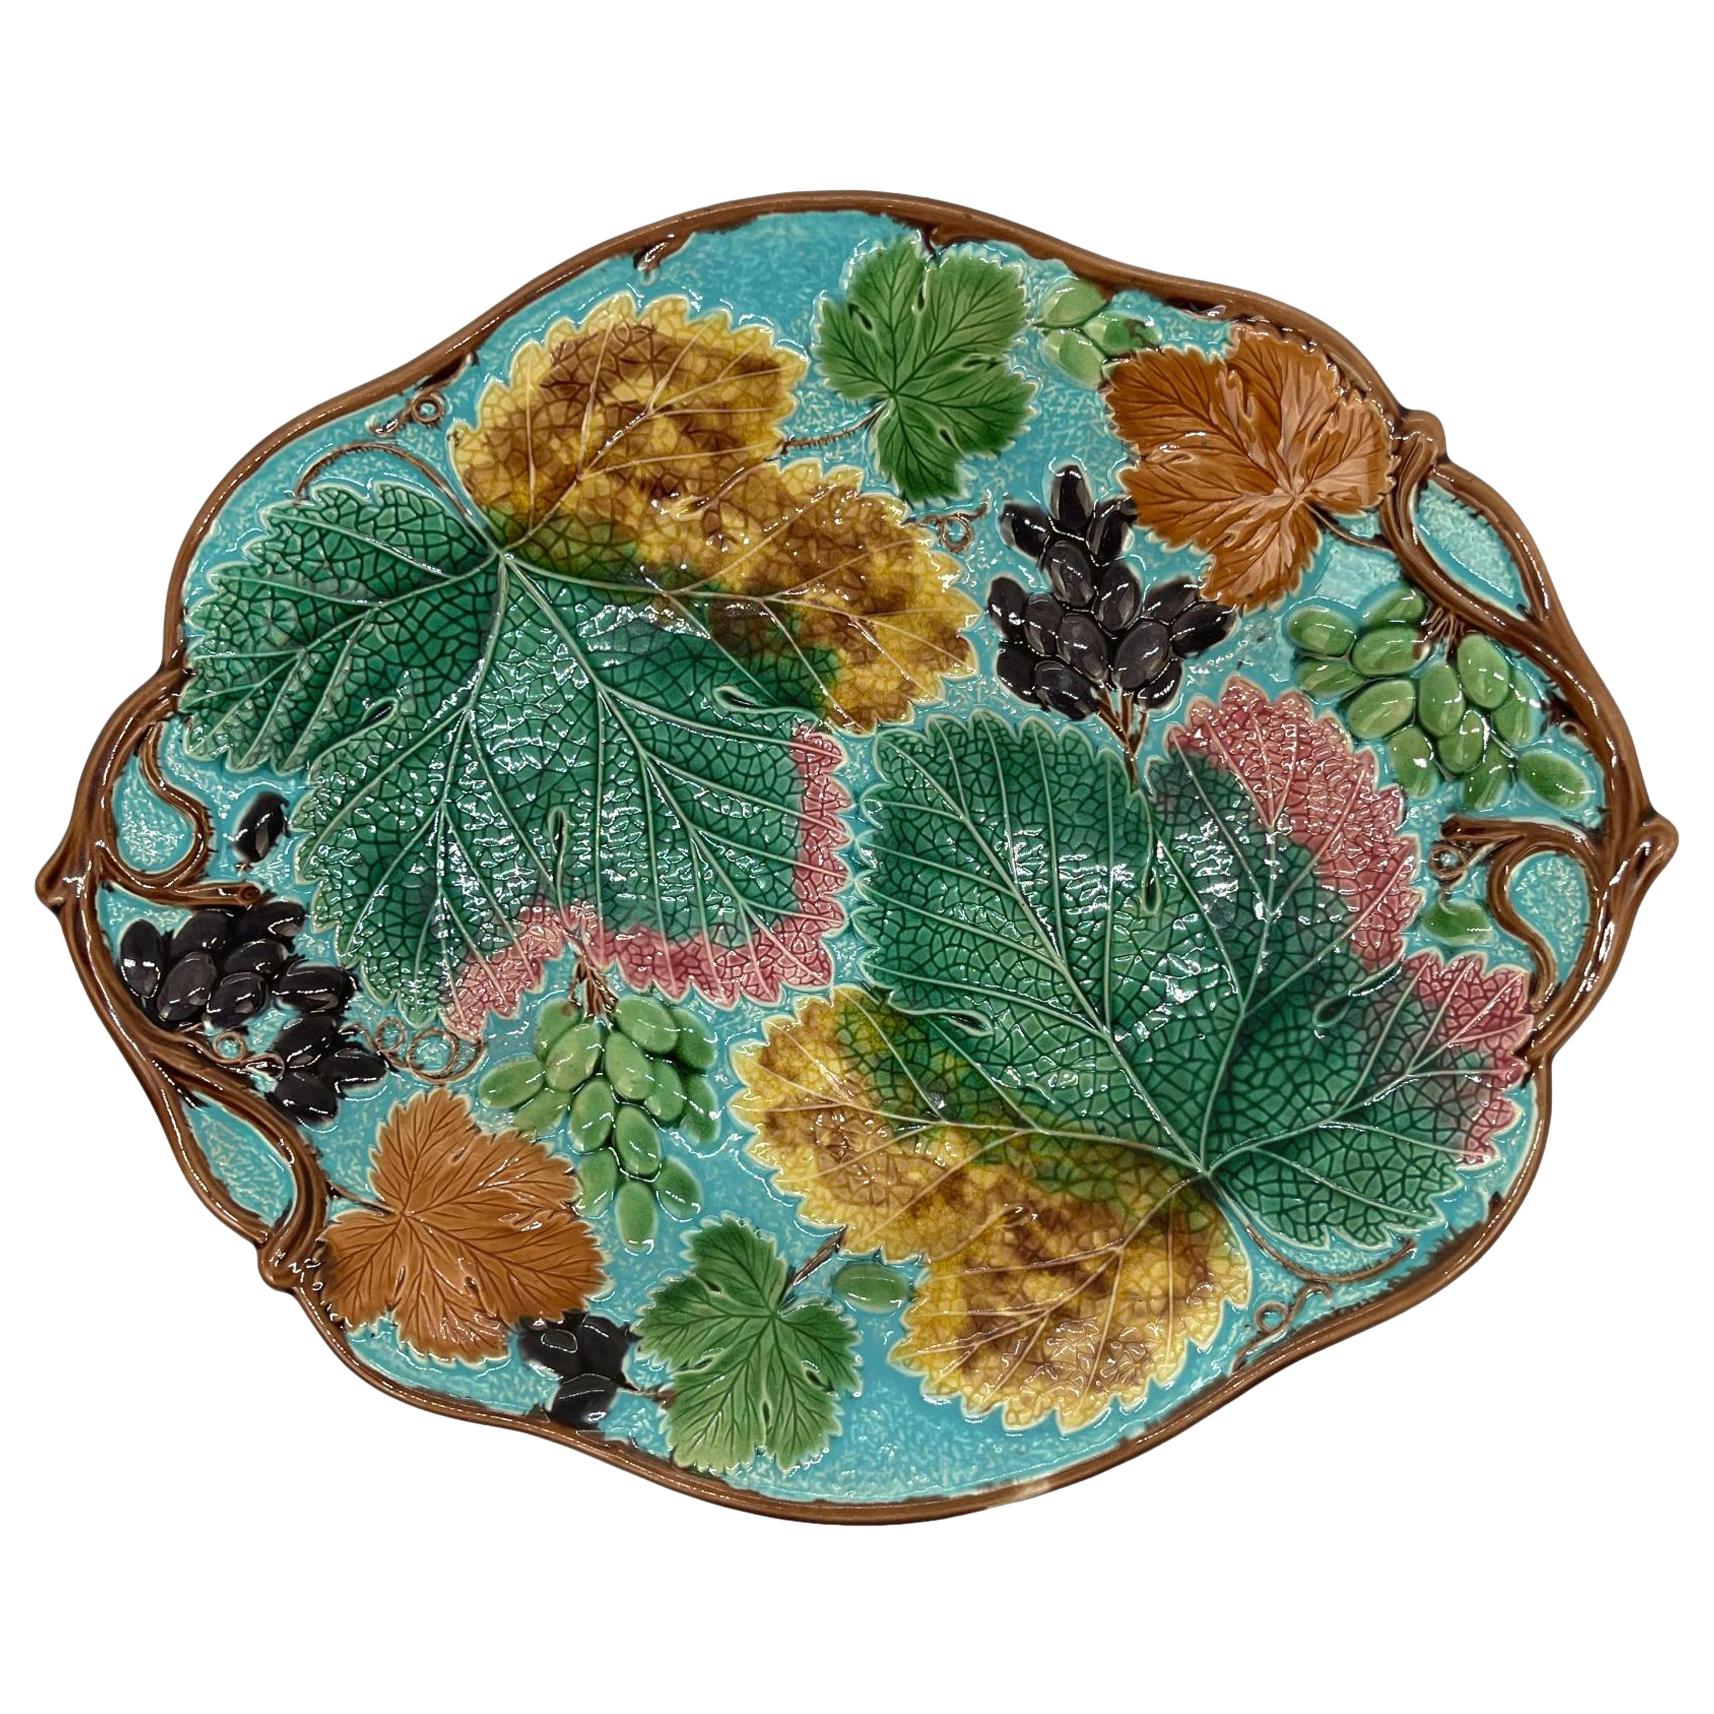 Wedgwood Majolica Grape, Leaf and Vine Bread Tray on Turquoise Ground, Date 1877